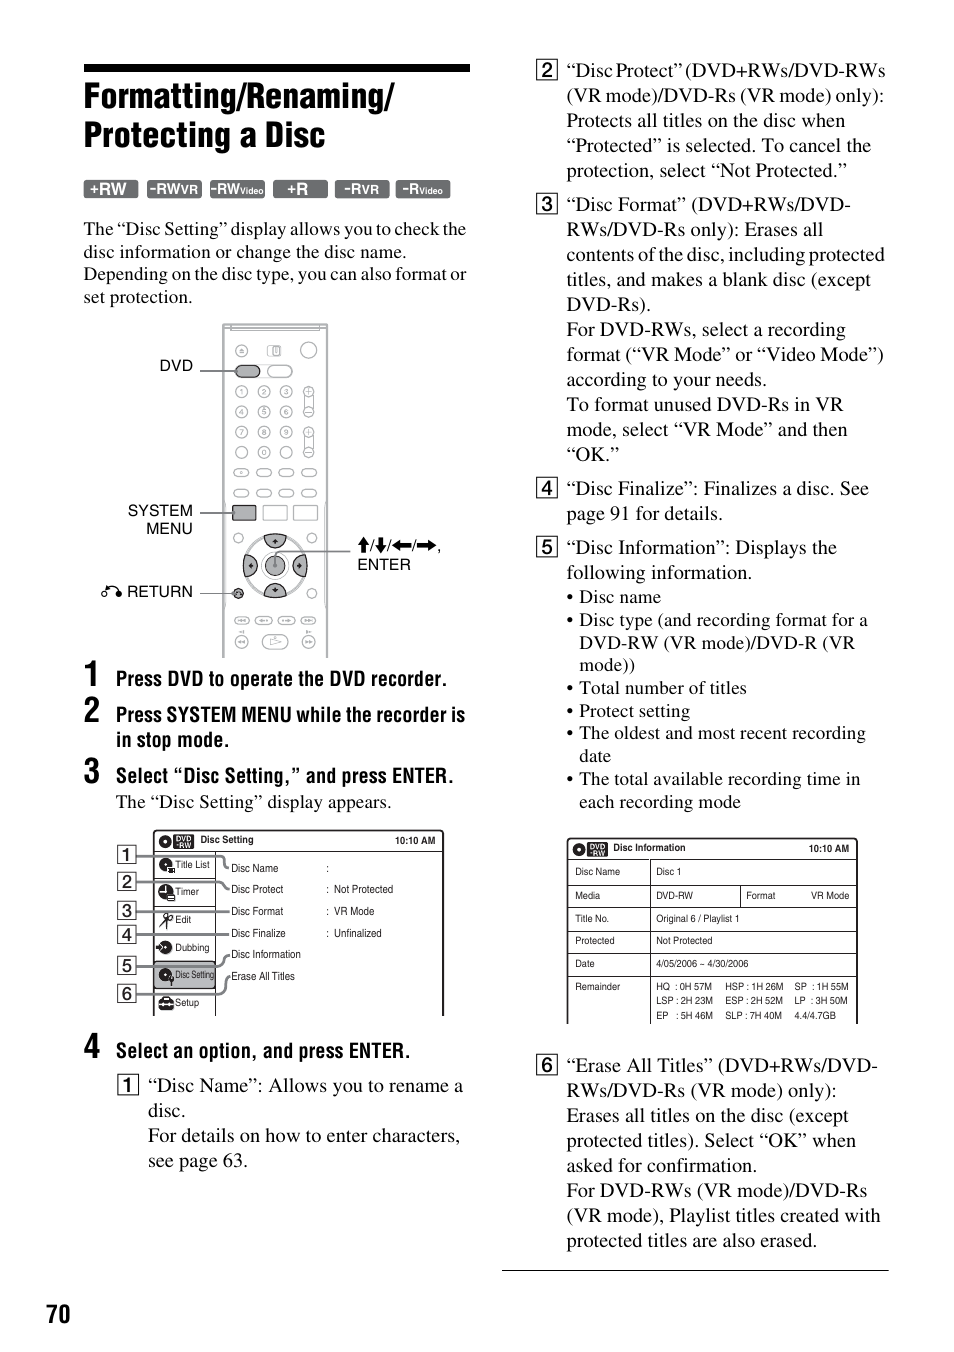 Formatting/renaming/ protecting a disc, Formatting/renaming/protecting a disc, Press dvd to operate the dvd recorder | Select “disc setting,” and press enter, The “disc setting” display appears | Sony RDR-VX521 User Manual | Page 70 / 132